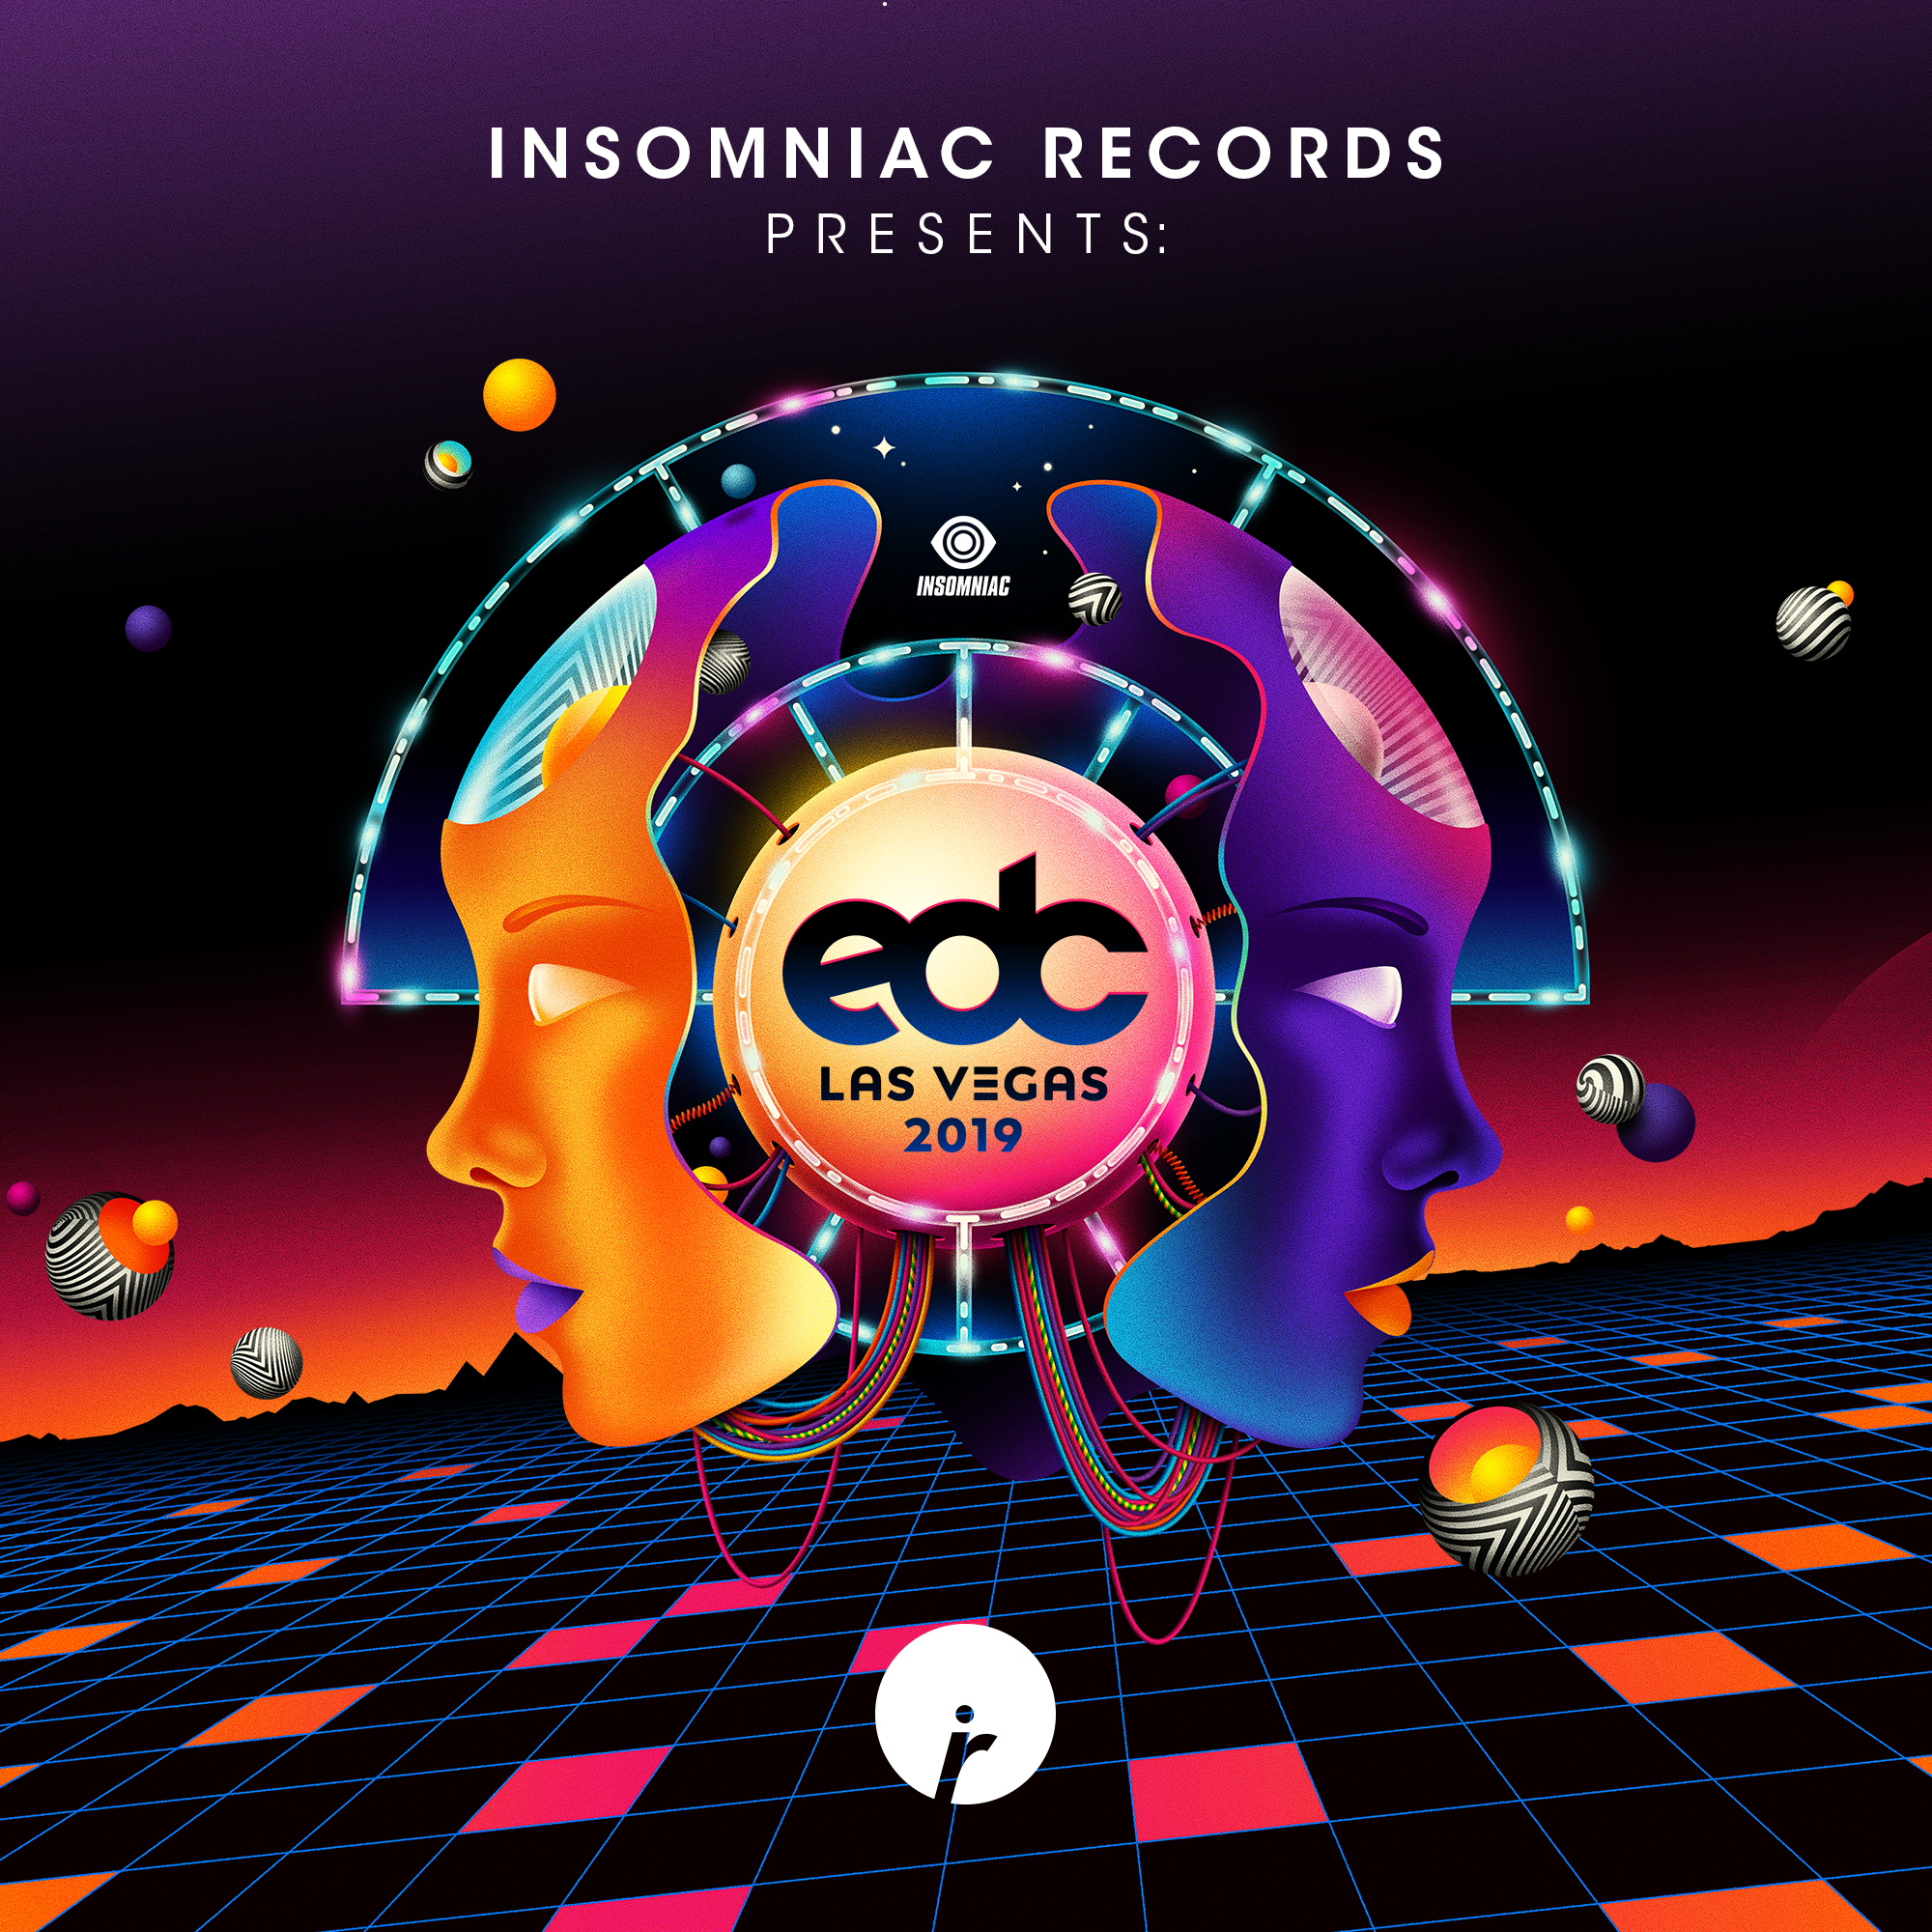 Get Ready to Dance Under the Electric Sky with Insomniac Records EDC Las Vegas 2019 Compilation